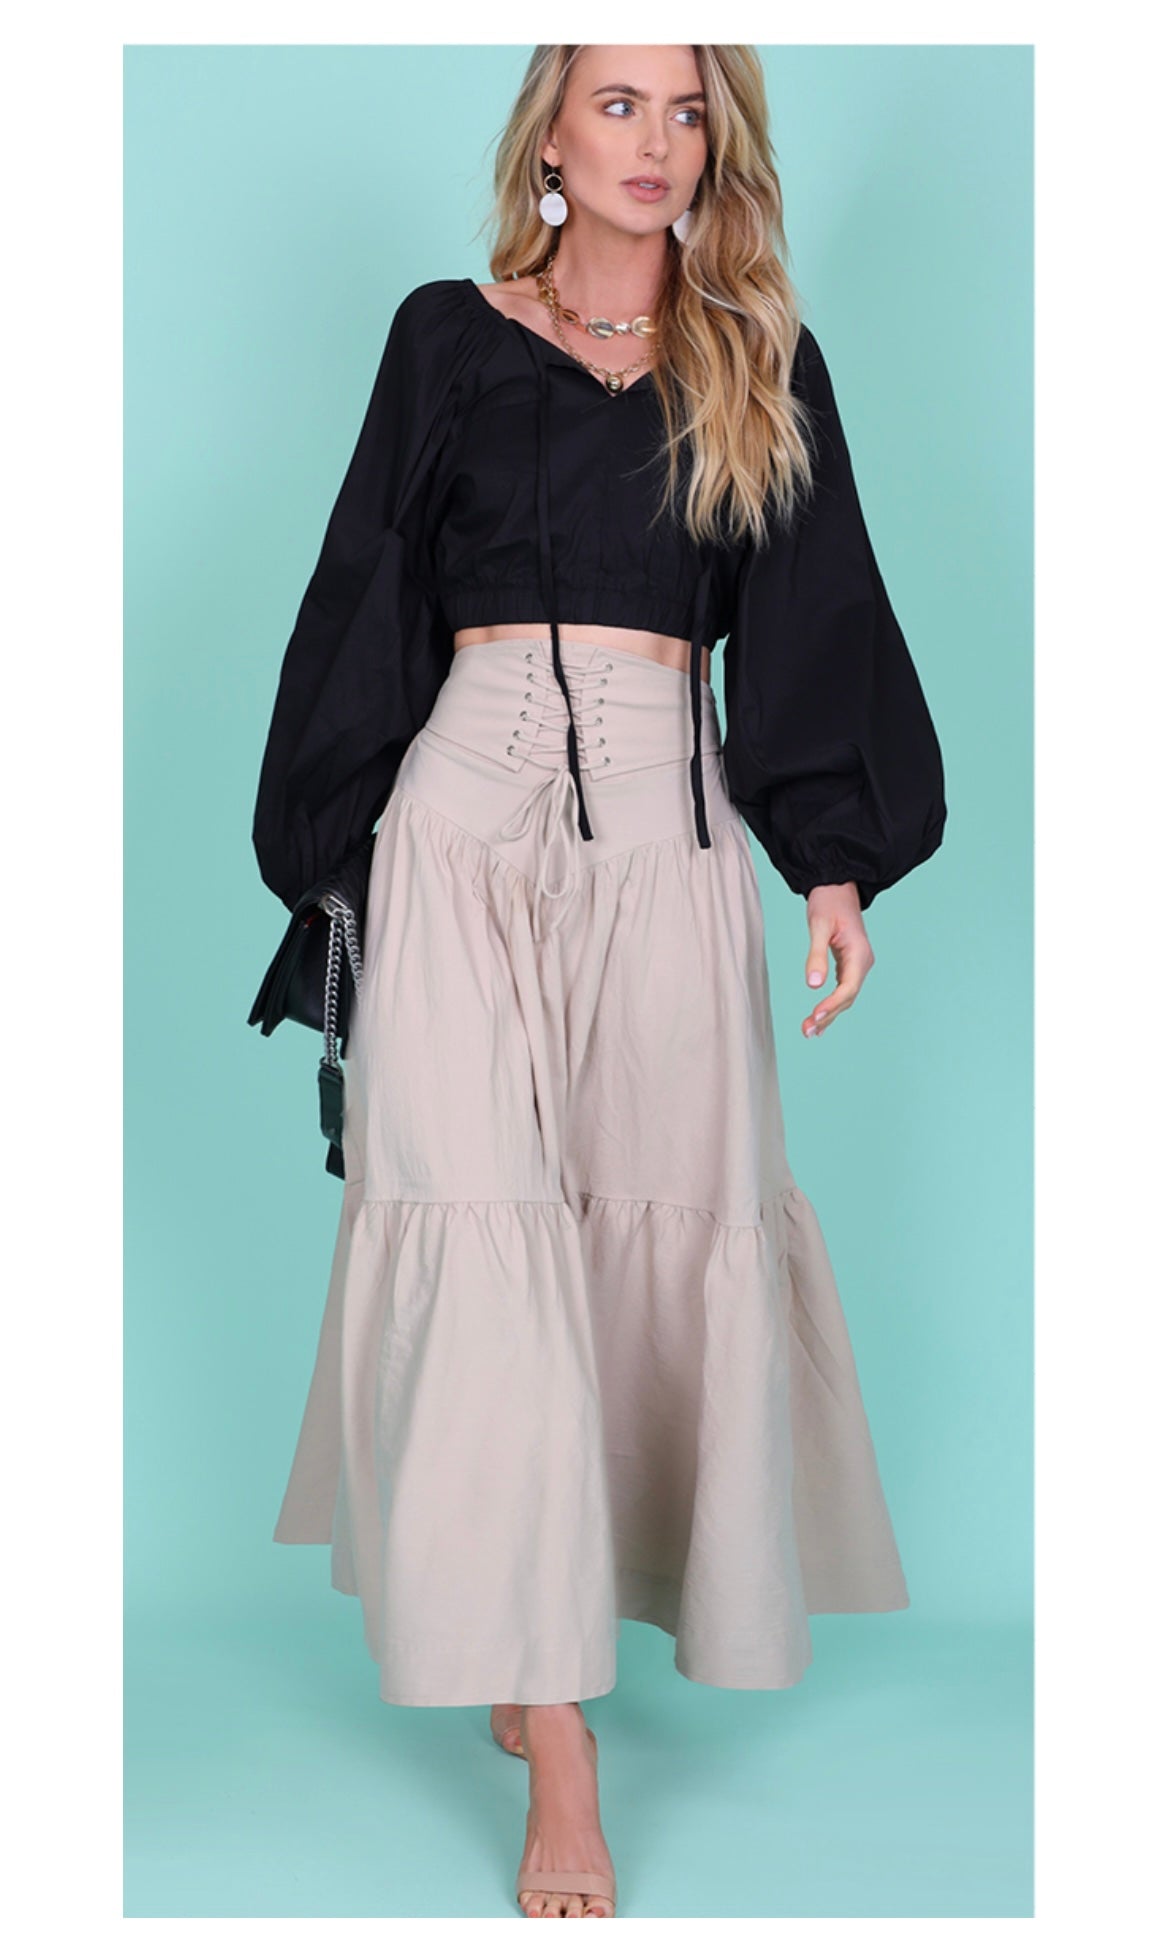 Victoria Cropped Blouse - Black